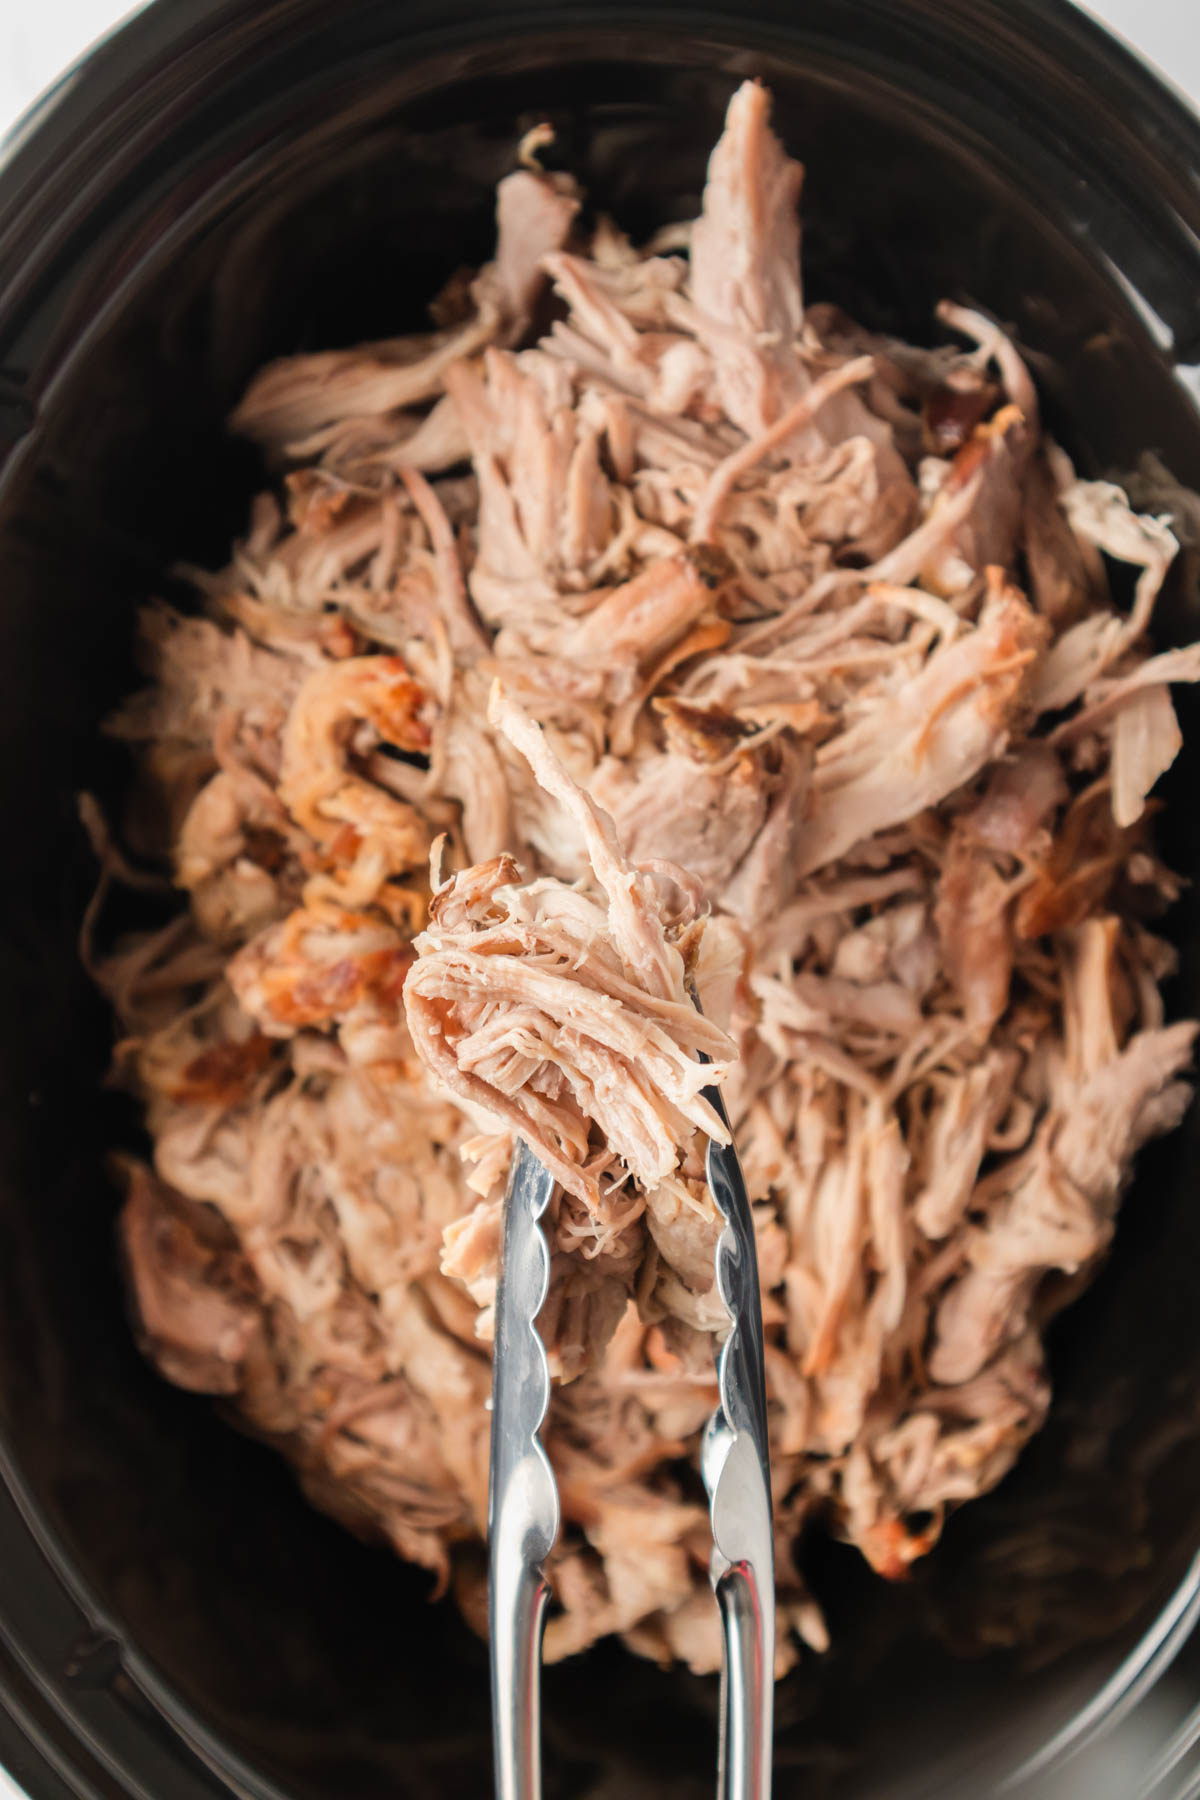 Close up image of shredded pulled pork in a slow cooker, with silver tongs visible a the bottom of the image. 